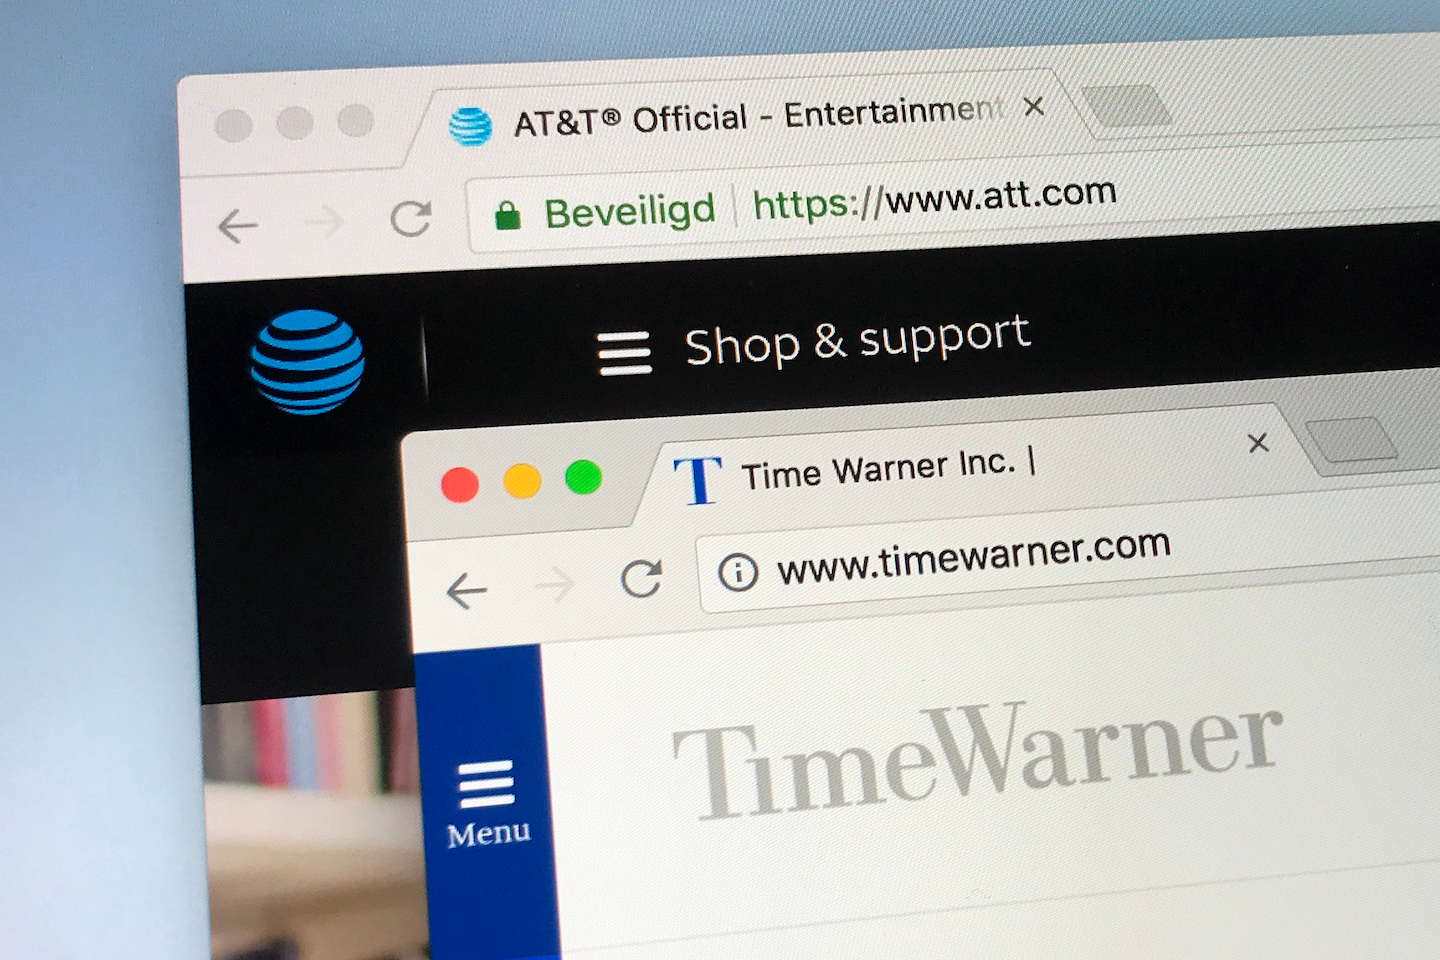 Websites of AT&T and Time Warner.